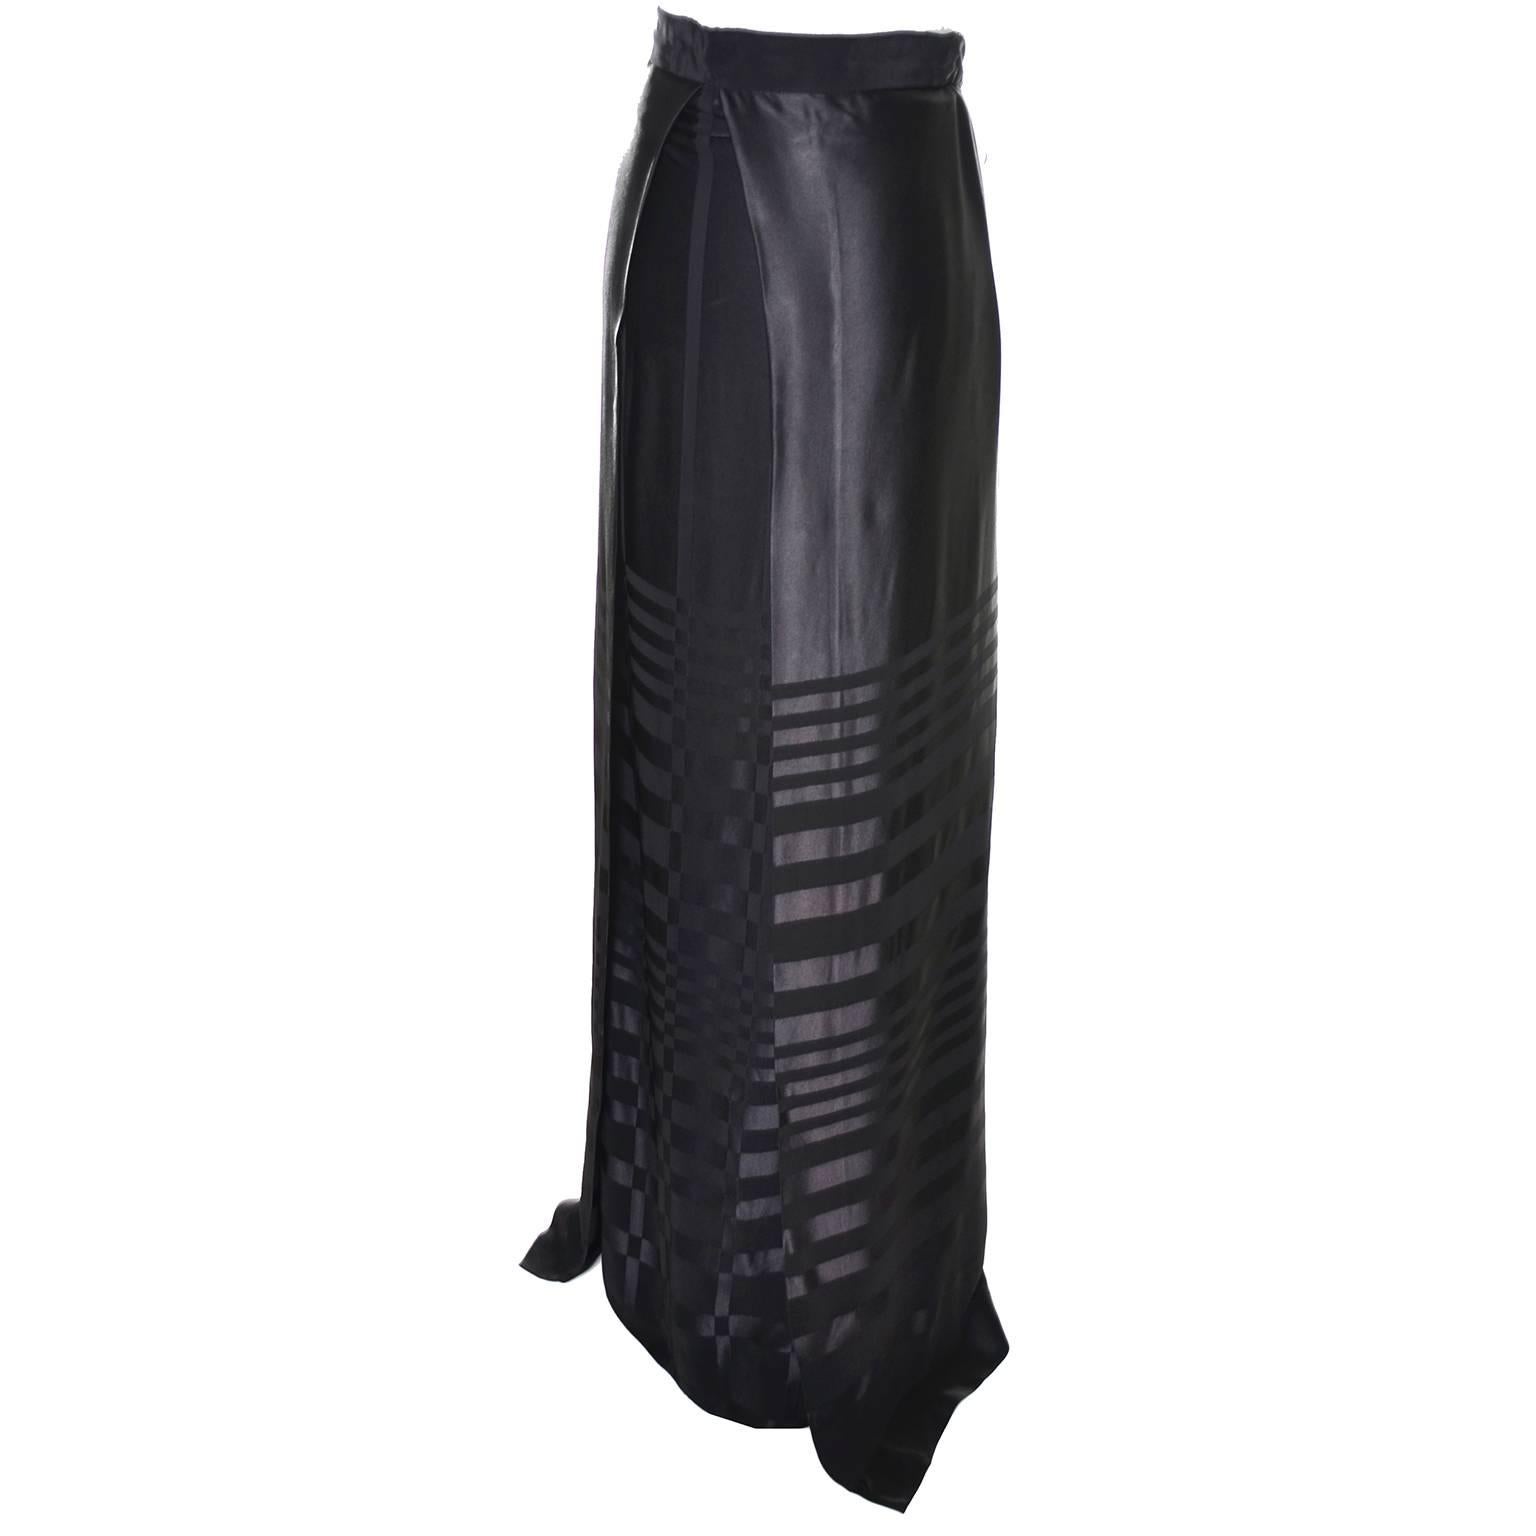 This incredible vintage skirt is from Jean Varon and was designed by John Bates and made in England in the 1970's. This black rayon blend satin tone on tone striped skirt has a slim long skirt underneath an attached over skirt. There is a back